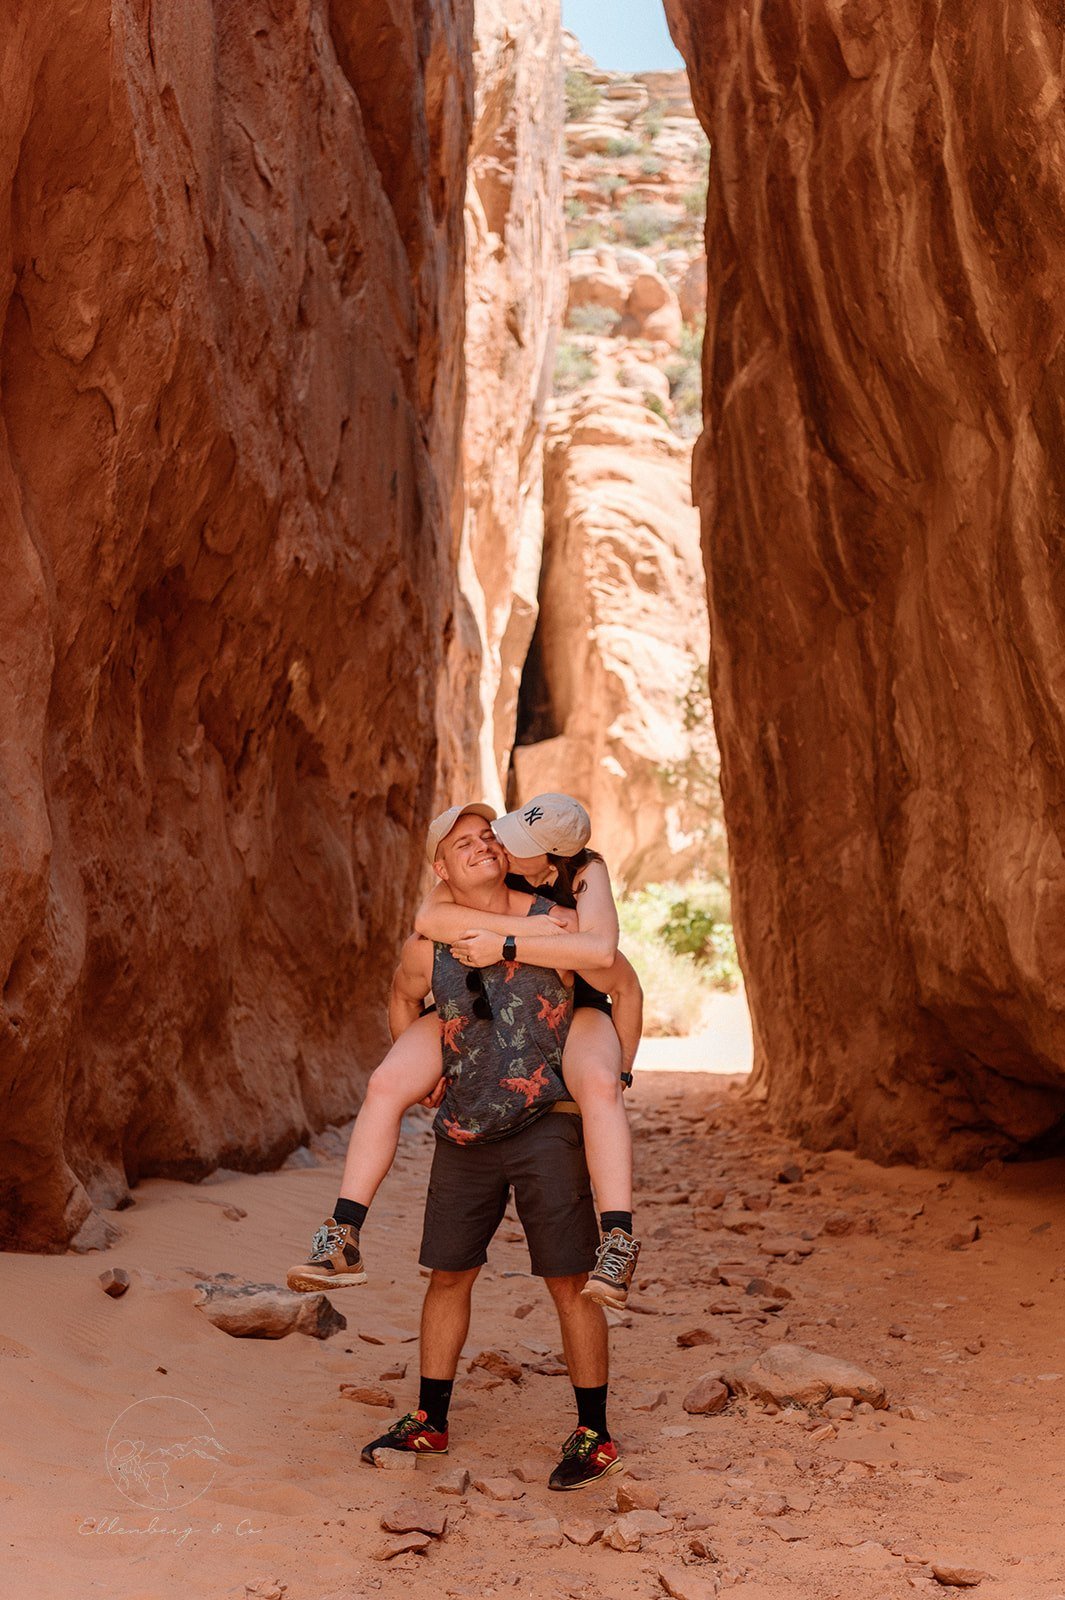  playful couples photo at arches national park, utah 